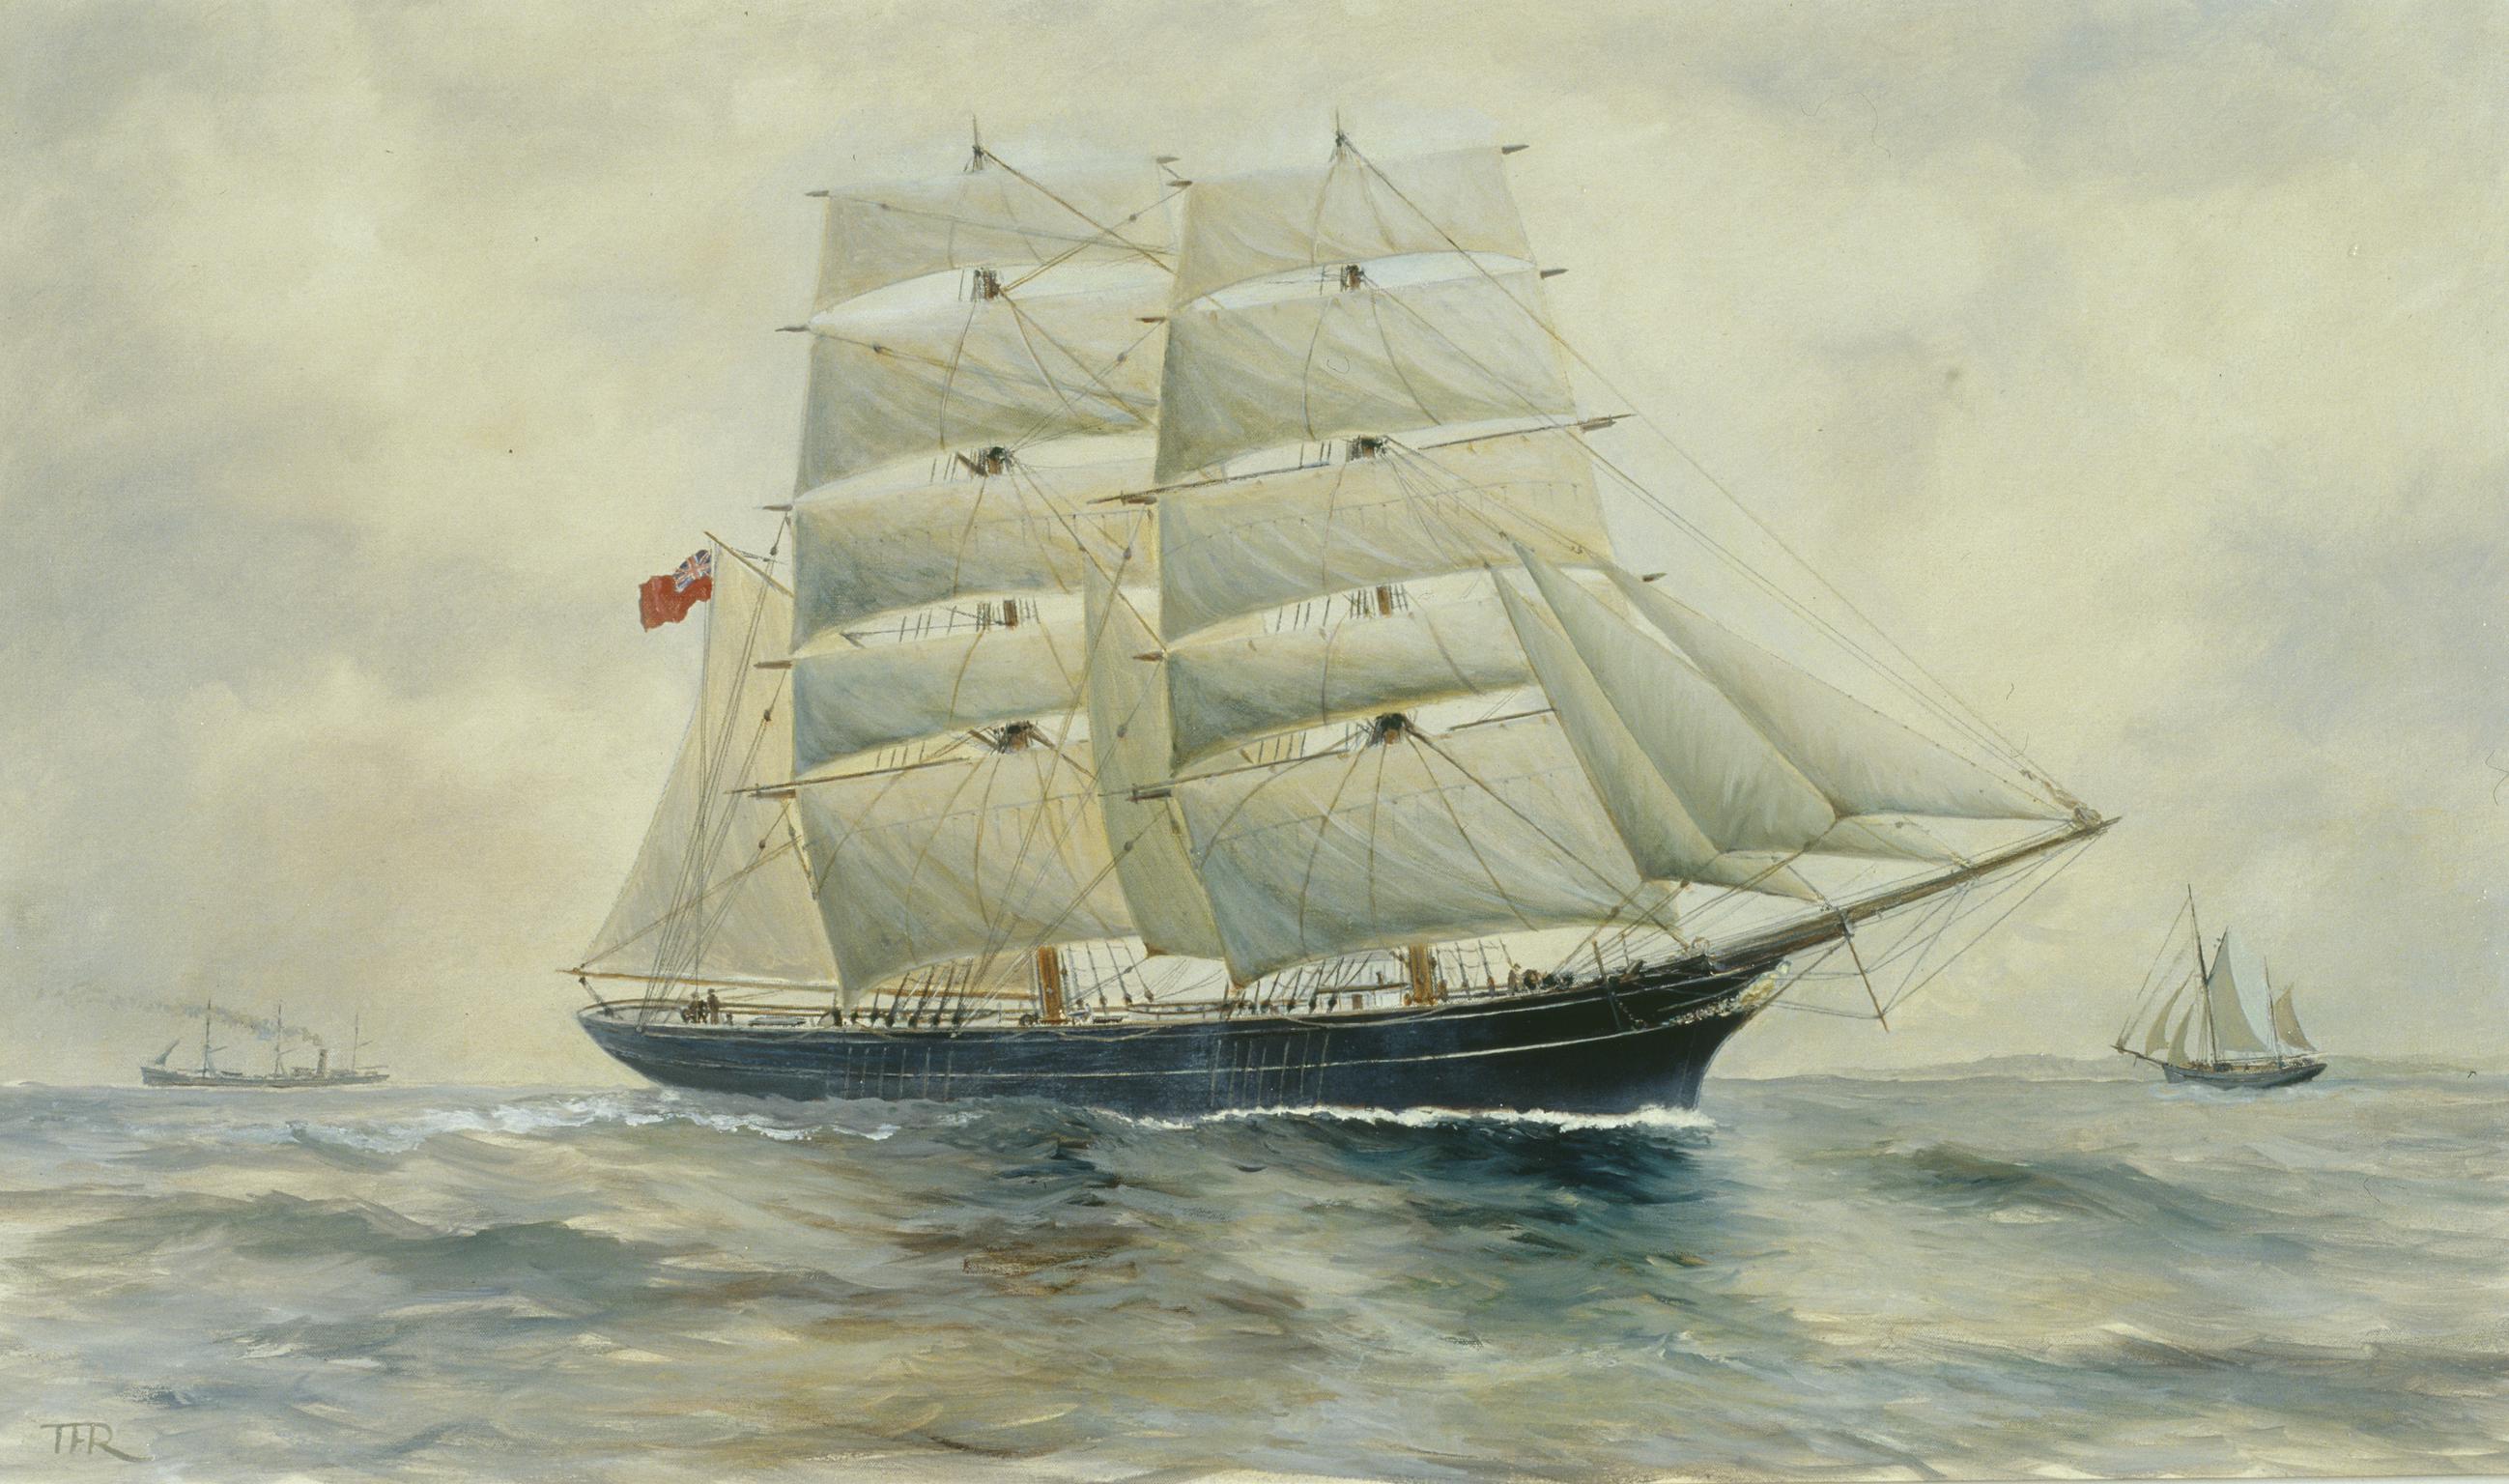 The Brig FLEETWING (painting)